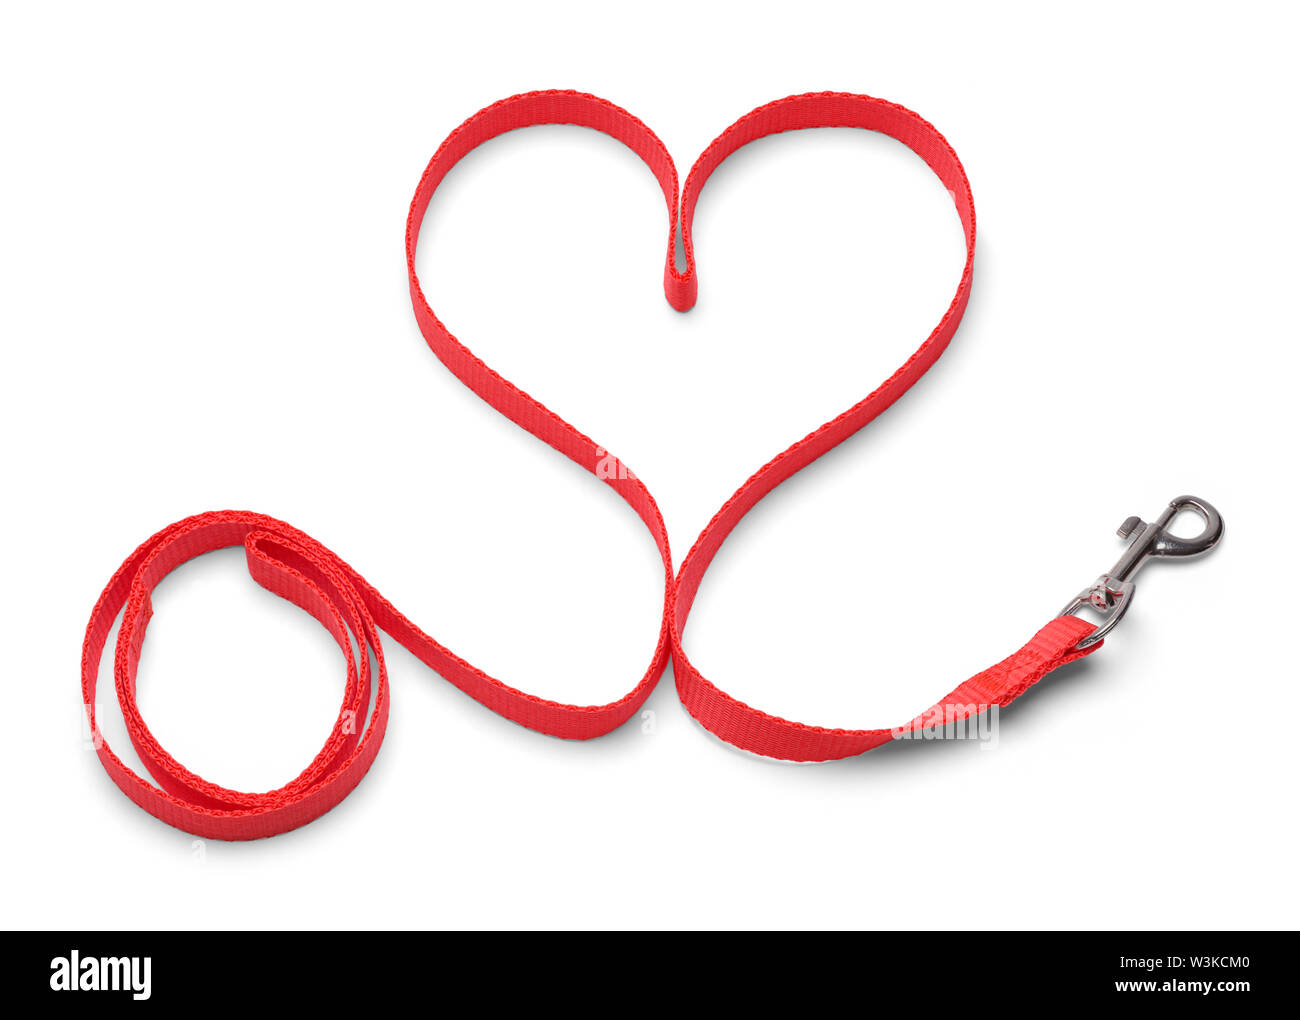 Red Fabric Dog leash Hanging Down Isolated on White Background. Stock Photo